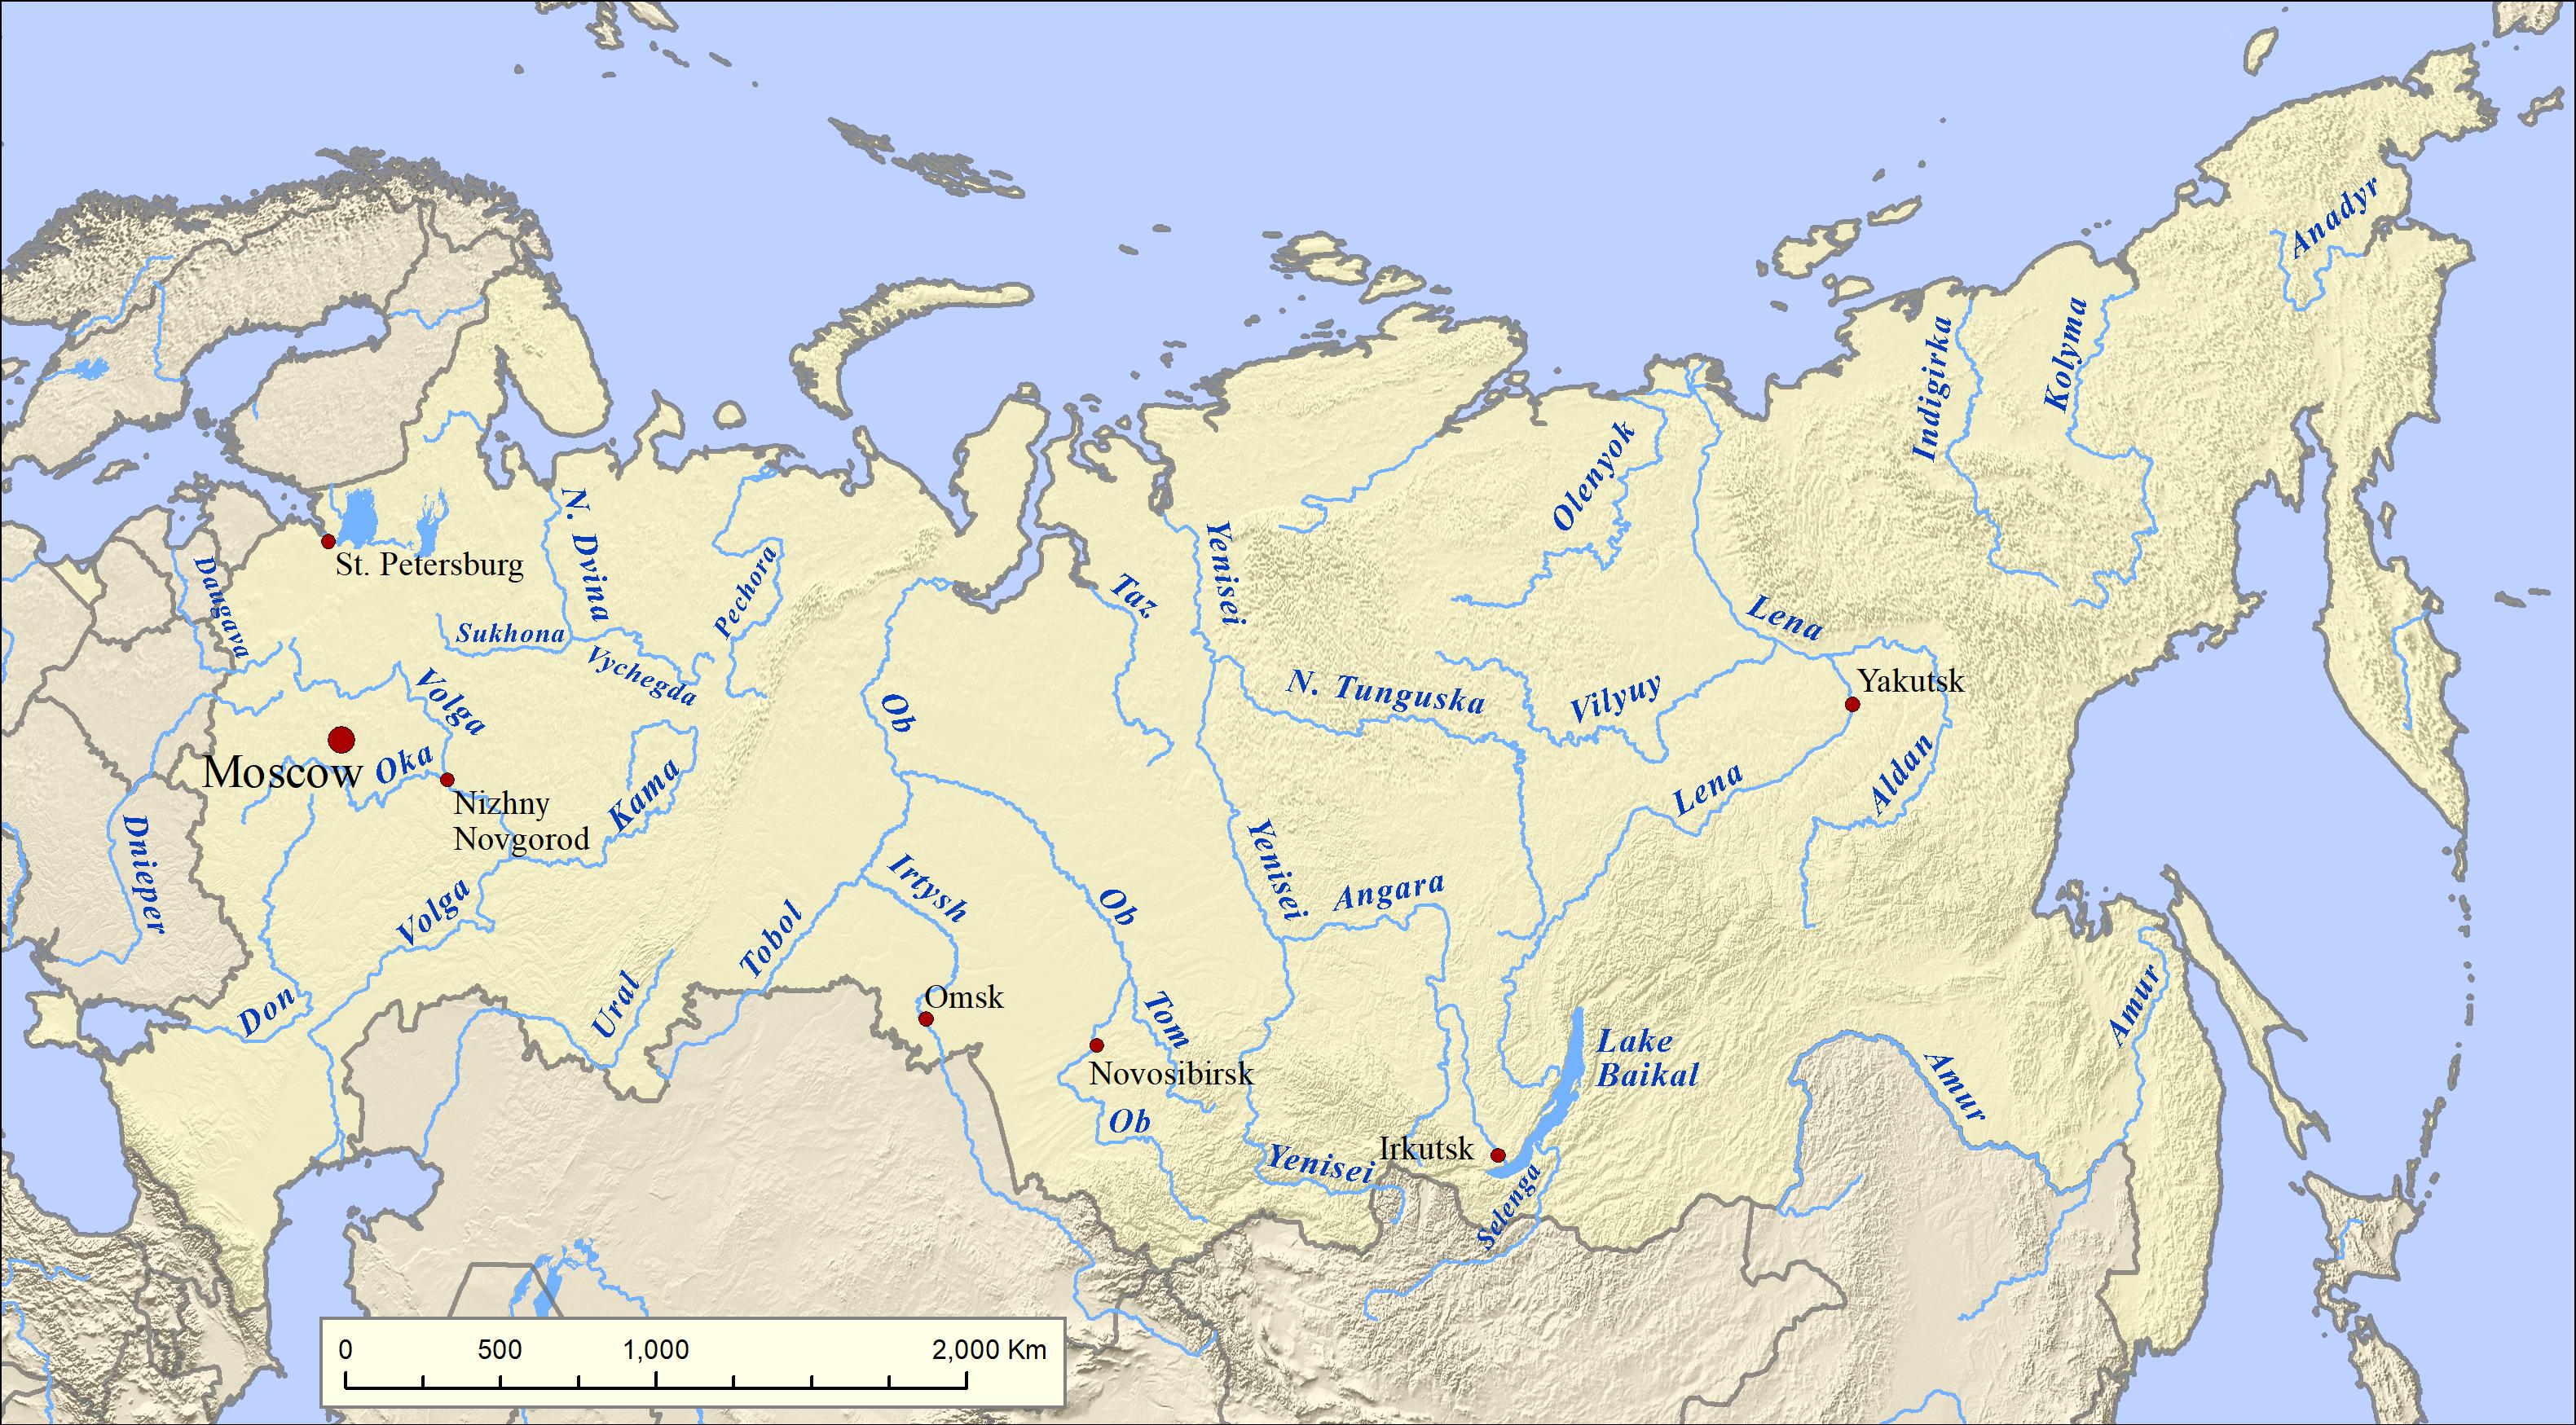 Geographical map of Russia: topography and physical features of Russia